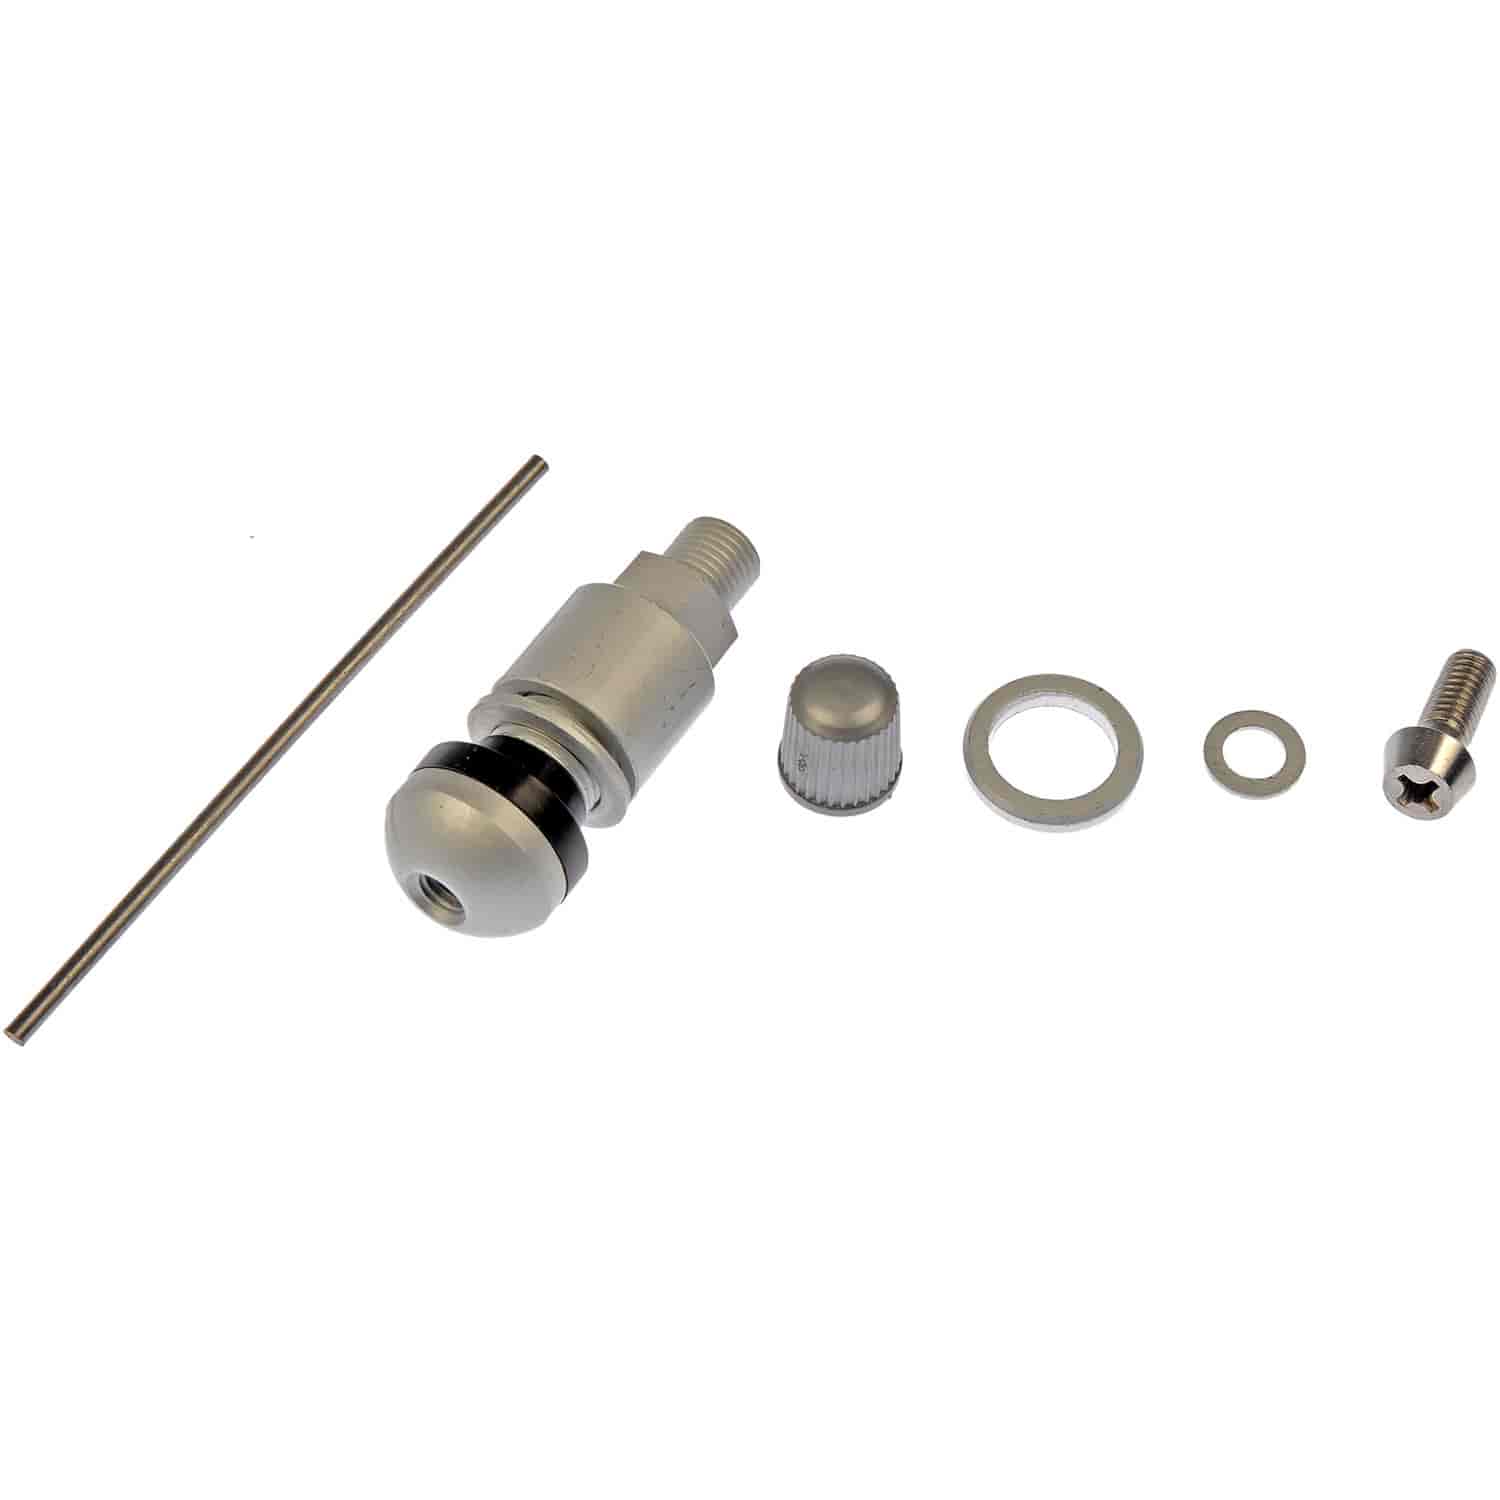 TPMS Service Kit - Replacement Aluminum Clamp-In Valve Stem with Mounting Screw